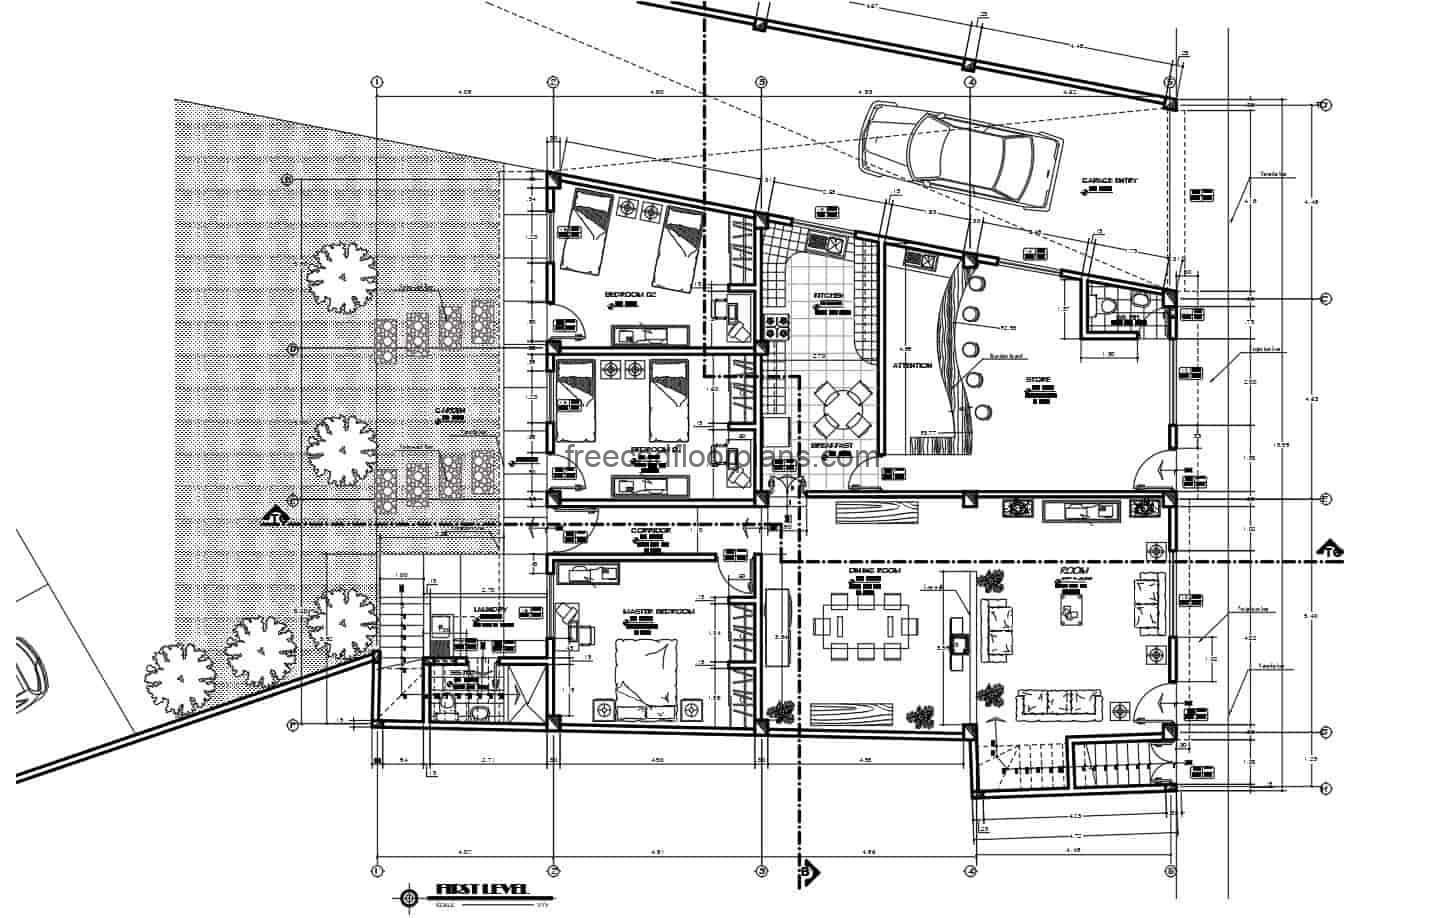 Architectural design of 2D DWG plans Mixed house and commerce with dimensioned plan, elevations and sections. The place has a two-level residence with seven rooms in total, living room, kitchen, dining room, and attached a commercial space in front. Blueprints 2D for free download in Autocad DWG format